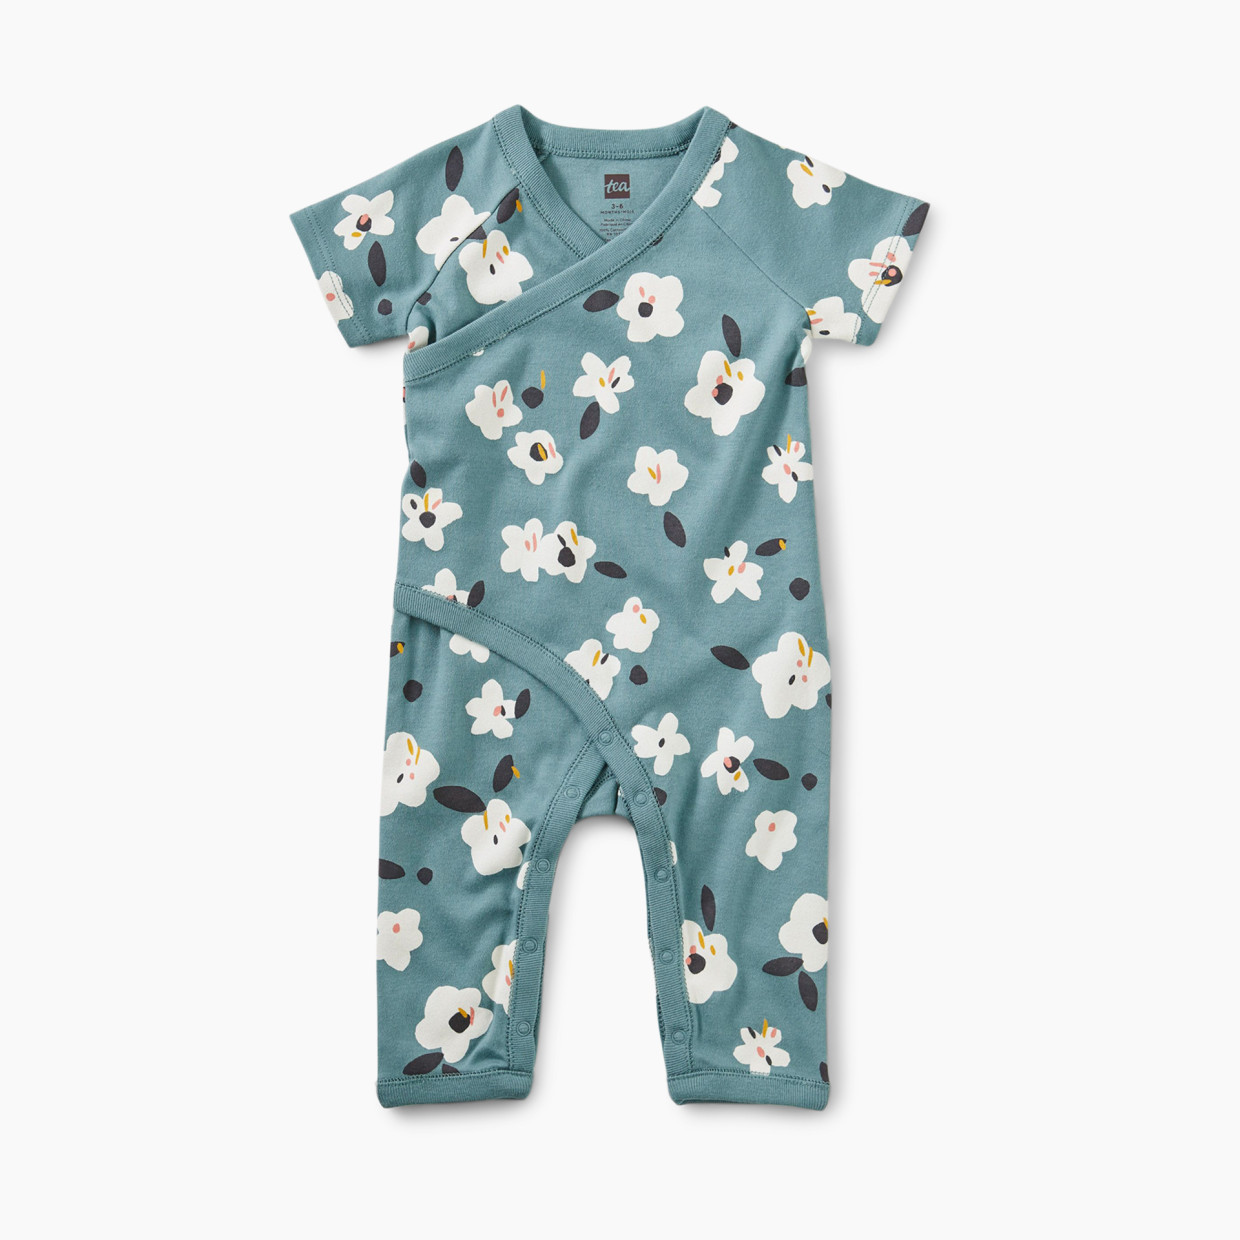 Tea Collection Wrap Baby Romper - Flores Forever, Newborn.